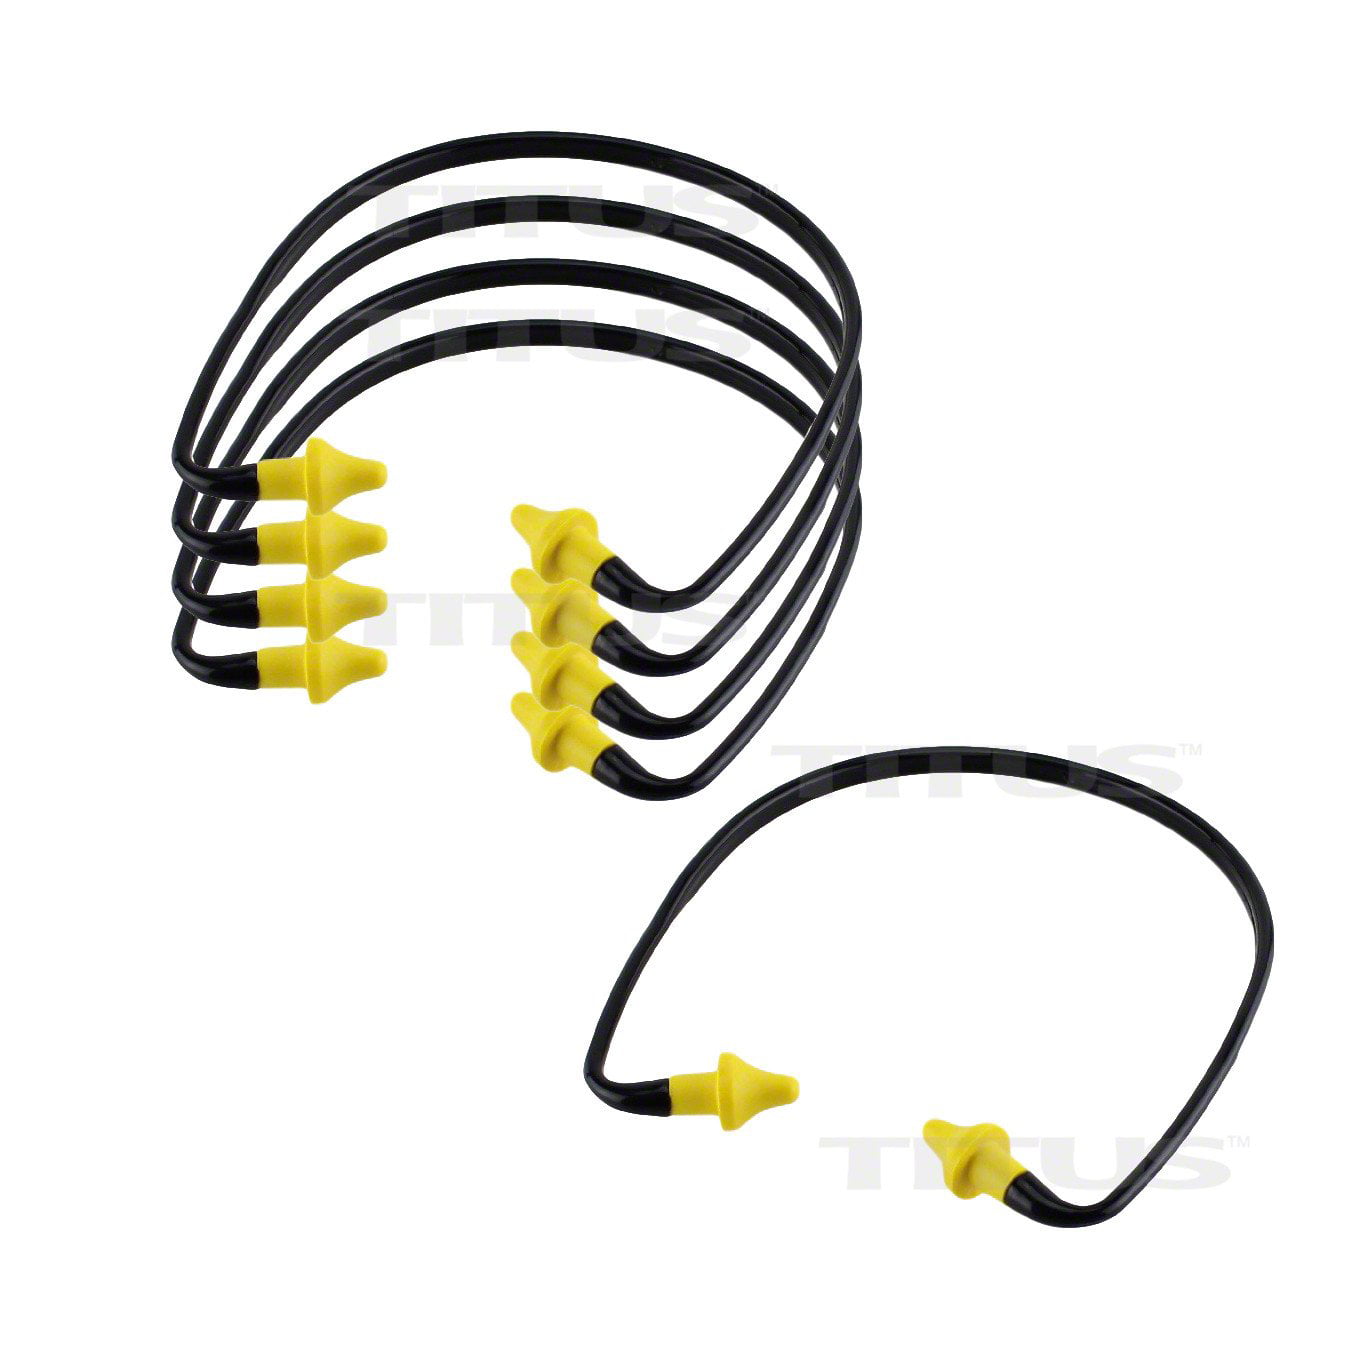 Titus U-Band Reusable Ear Plugs 2 pack for sale online 